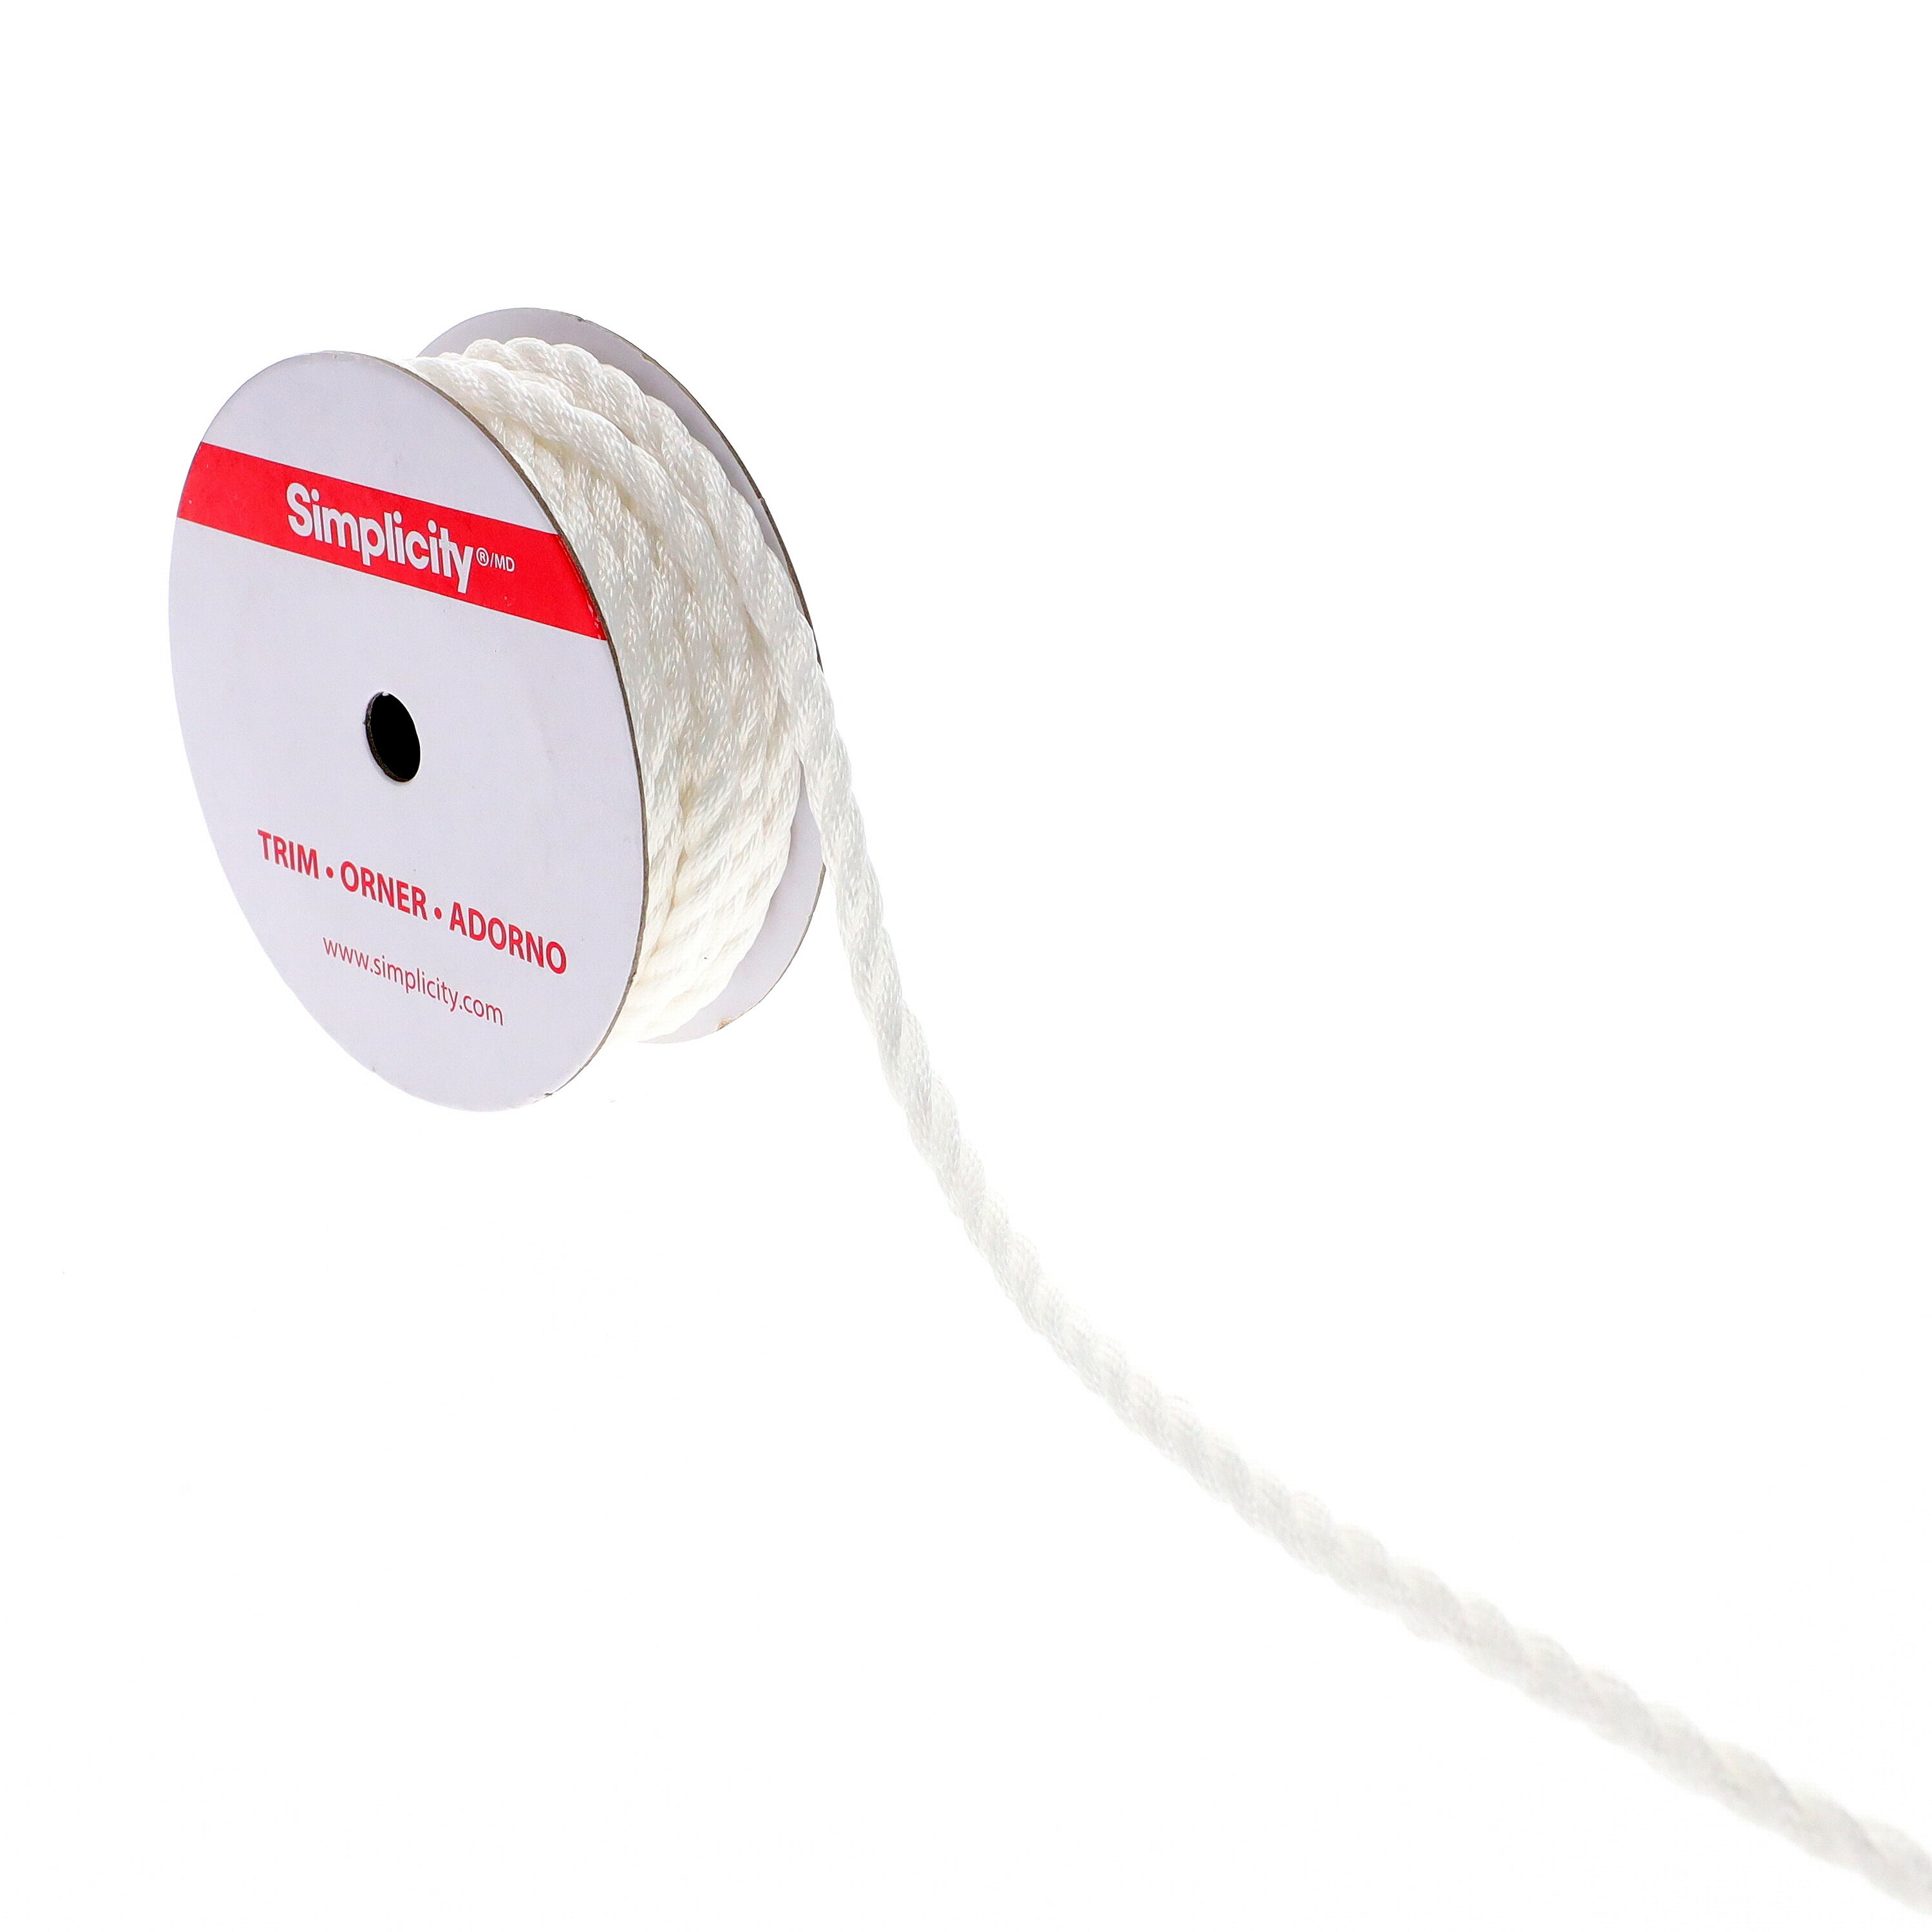 Simplicity Trim, White 3/16 inch 3 Ply Twisted Cord Trim Great for Apparel, Home Decorating, and Crafts, 3 Yards, 1 Each